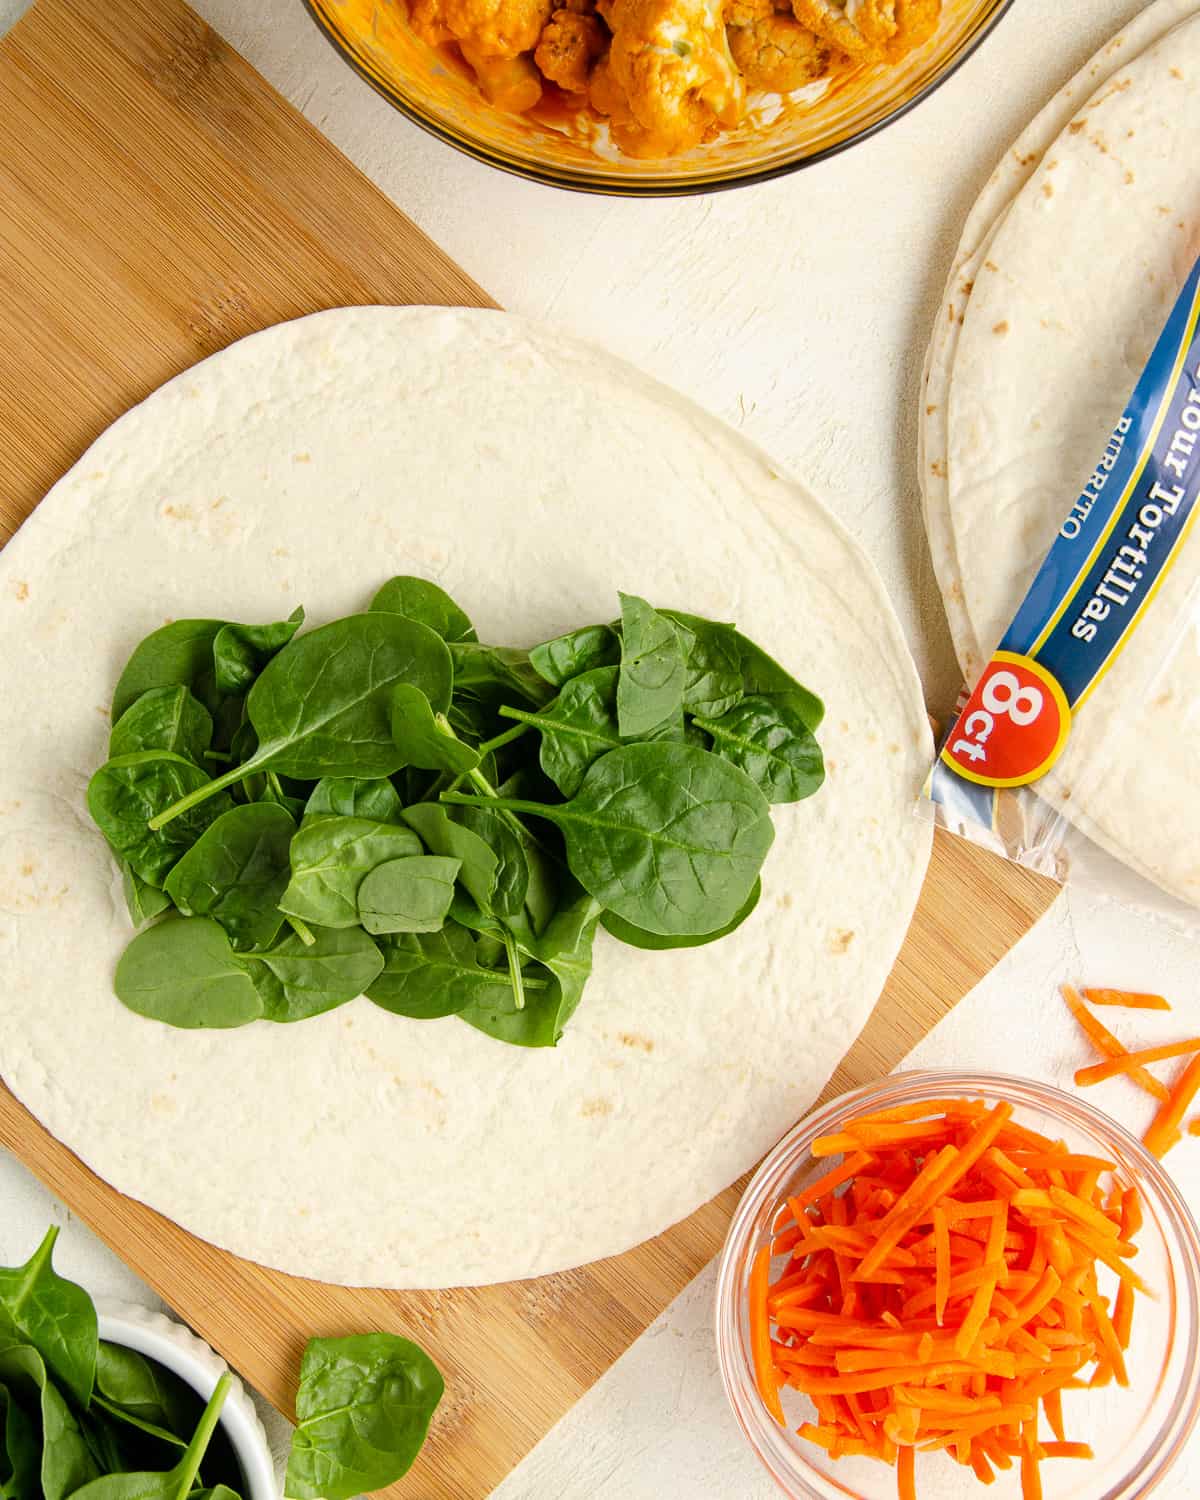 Step one of making the wrap: adding spinach on top of the tortilla.